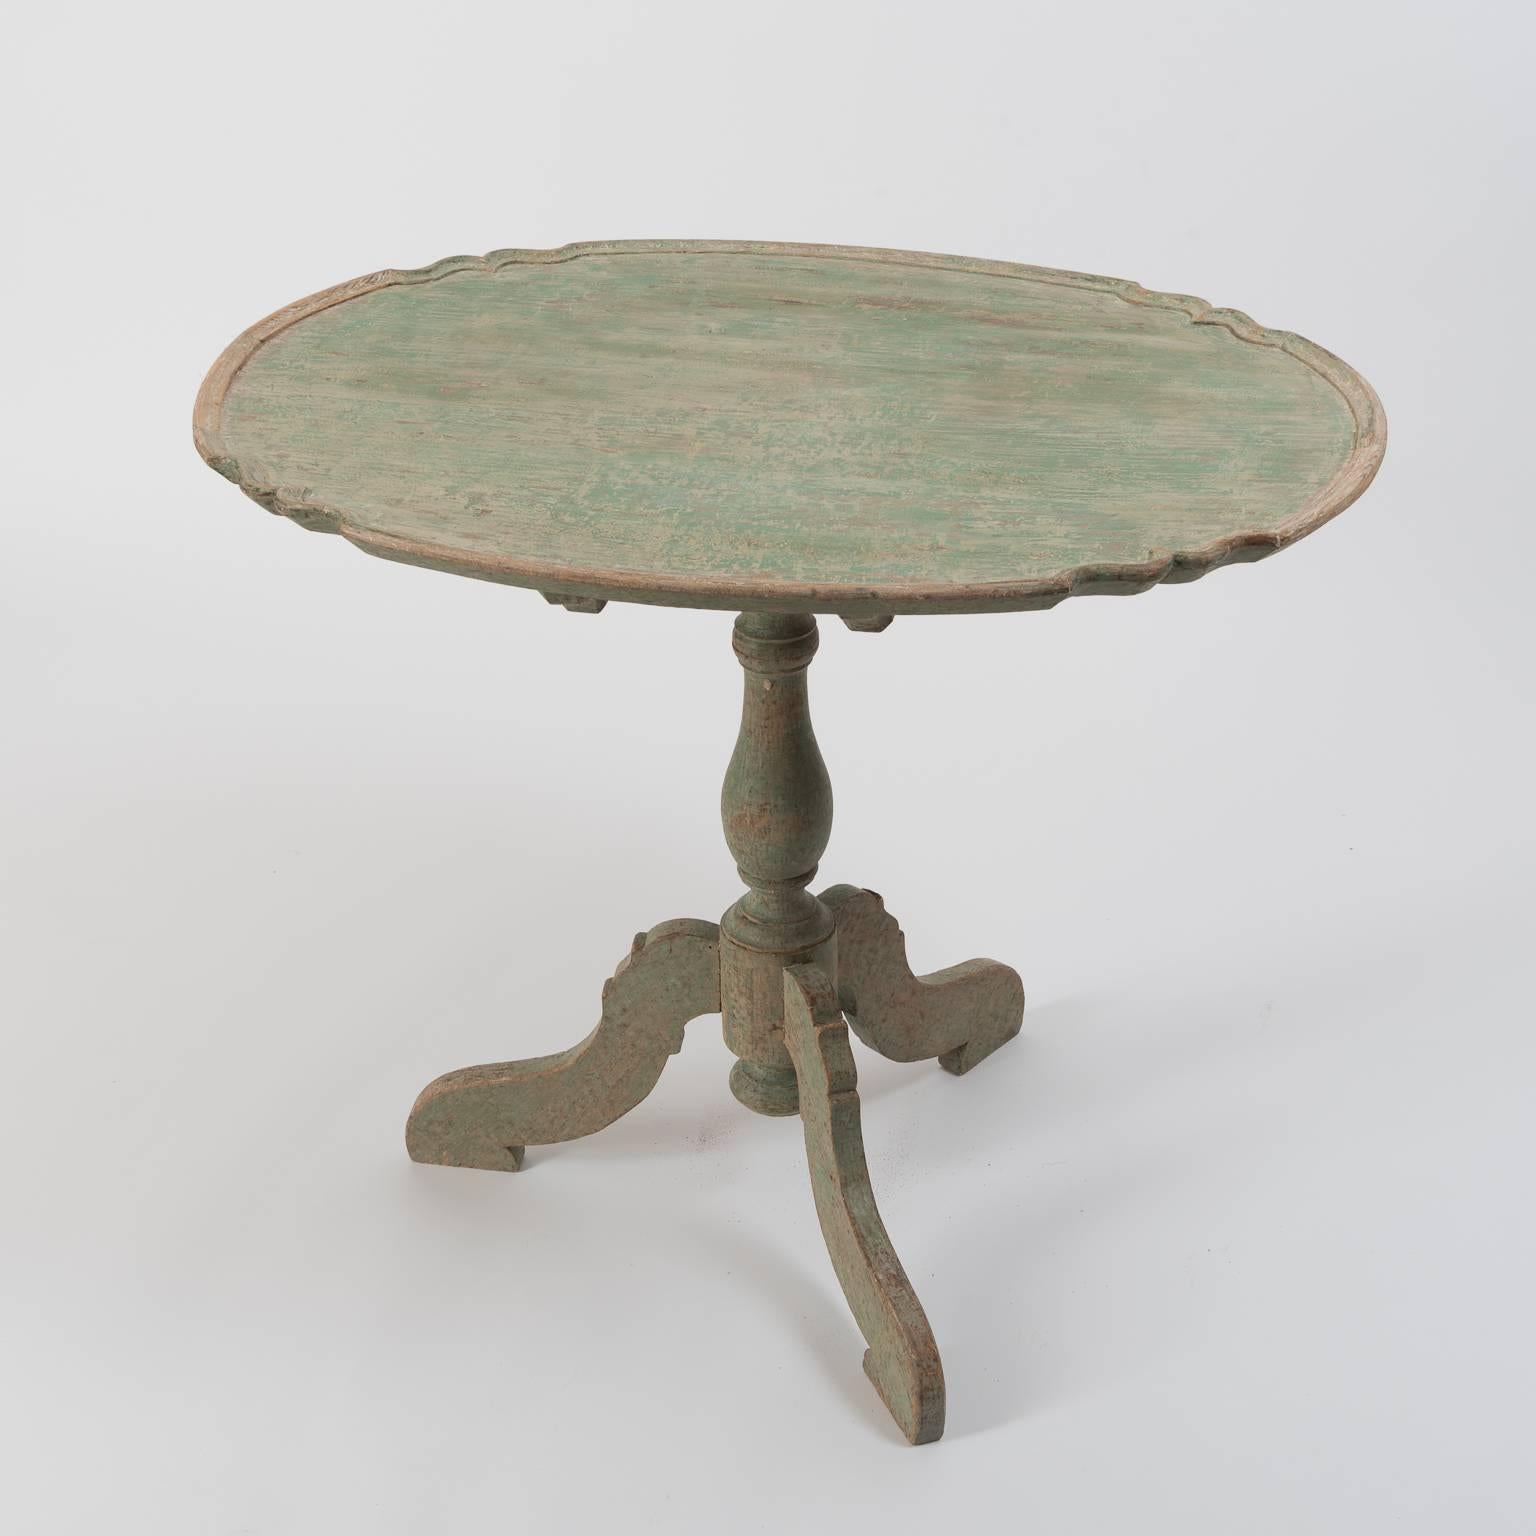 Tilt-top table with oval contoured top. Dry scraped to original paint, Sweden, circa 1770.